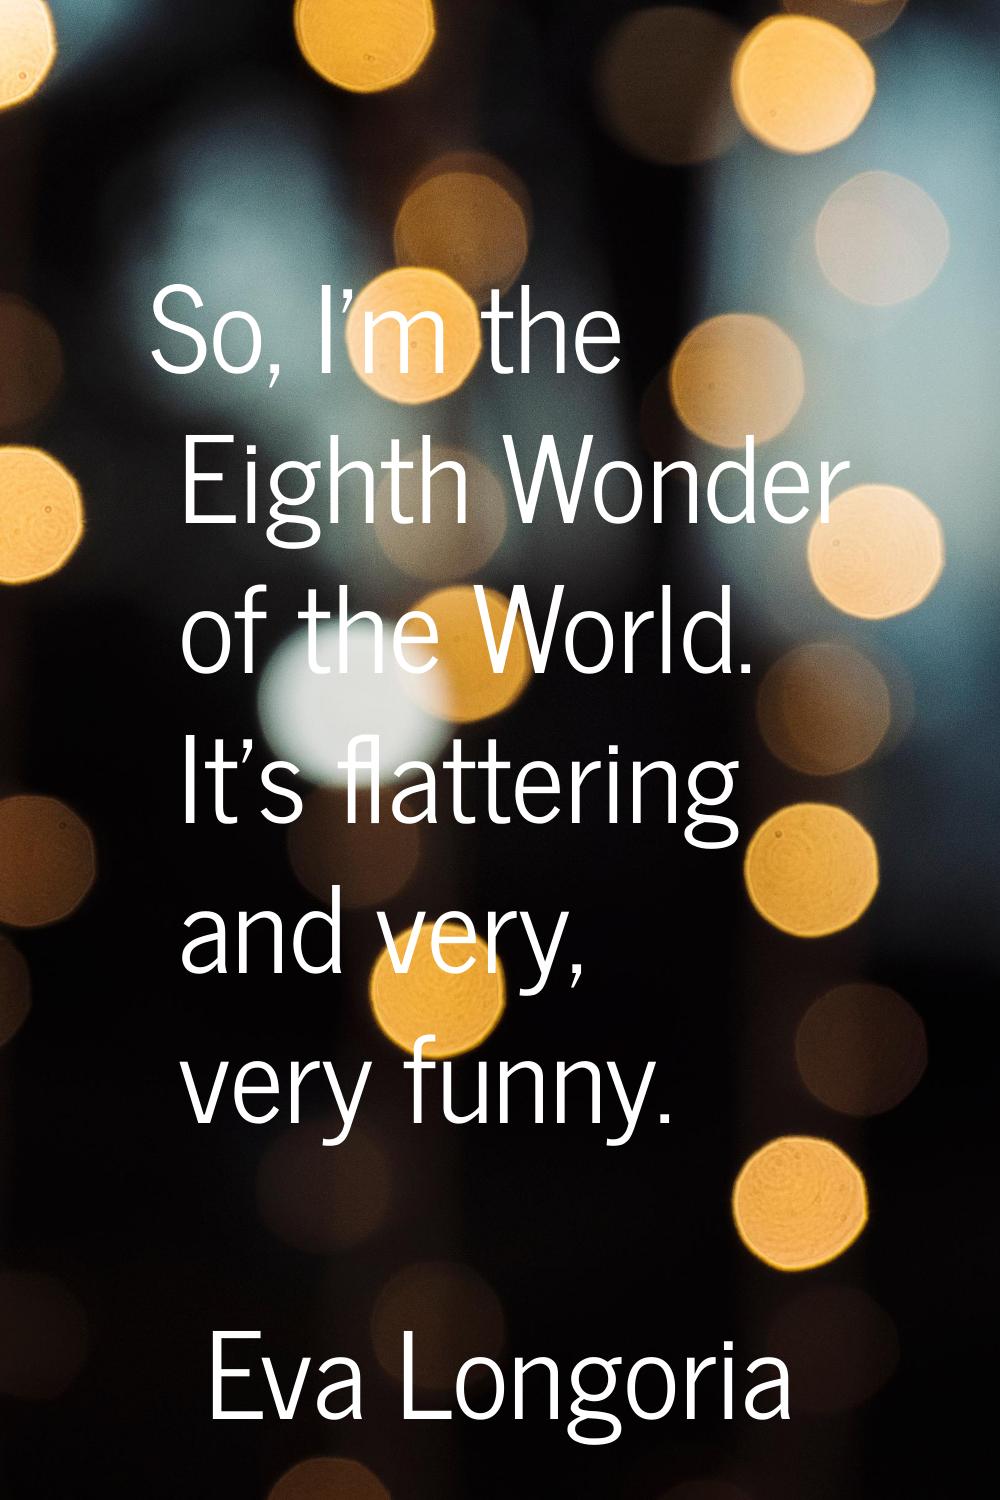 So, I'm the Eighth Wonder of the World. It's flattering and very, very funny.